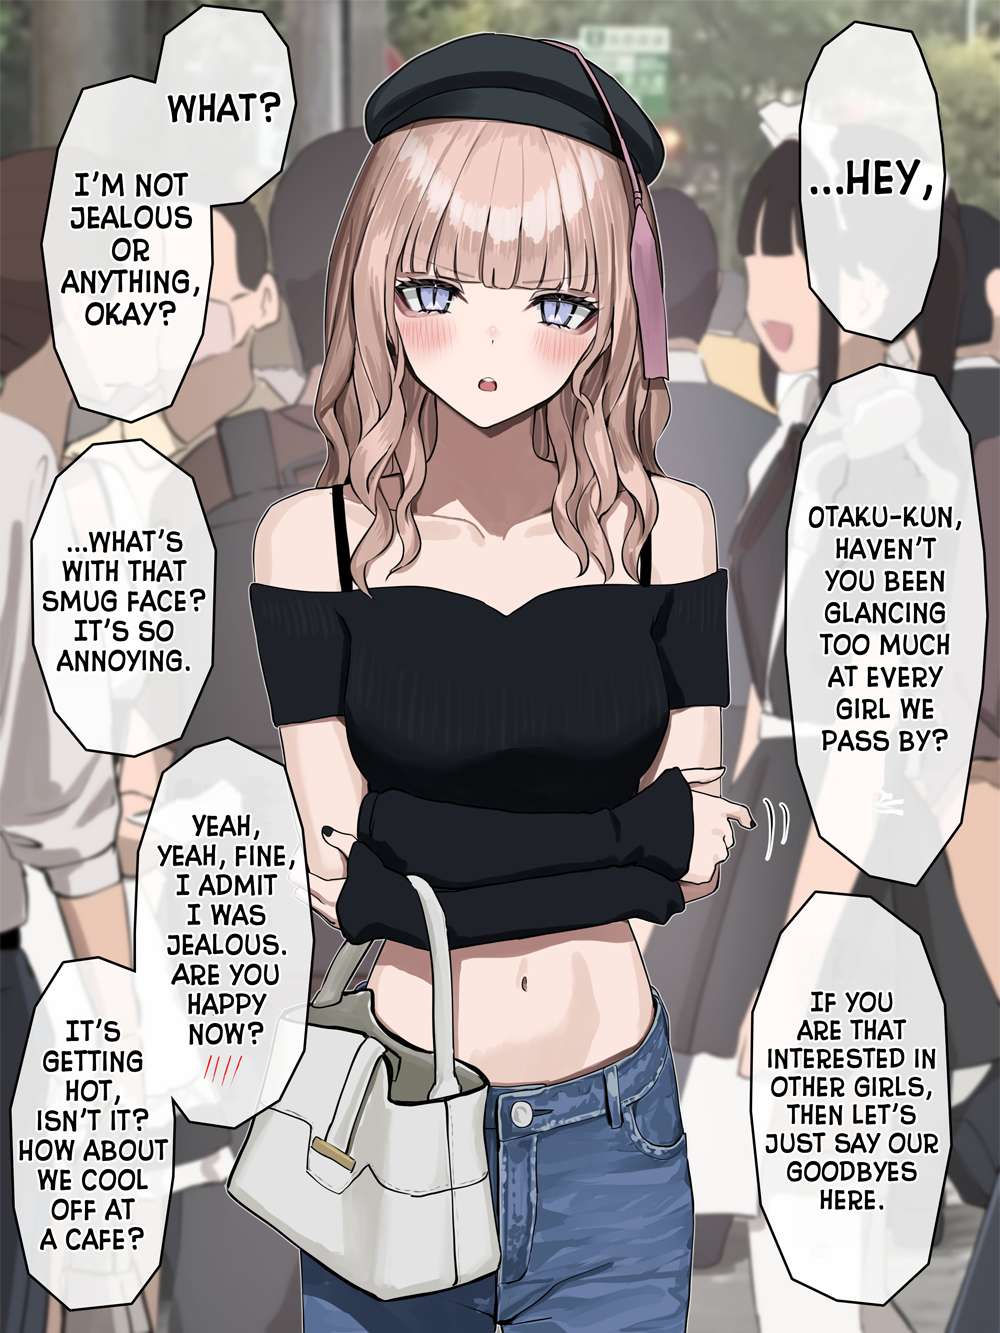 A Tsundere Gal Is Becoming Cuter Day by Day - chapter 3 - #1